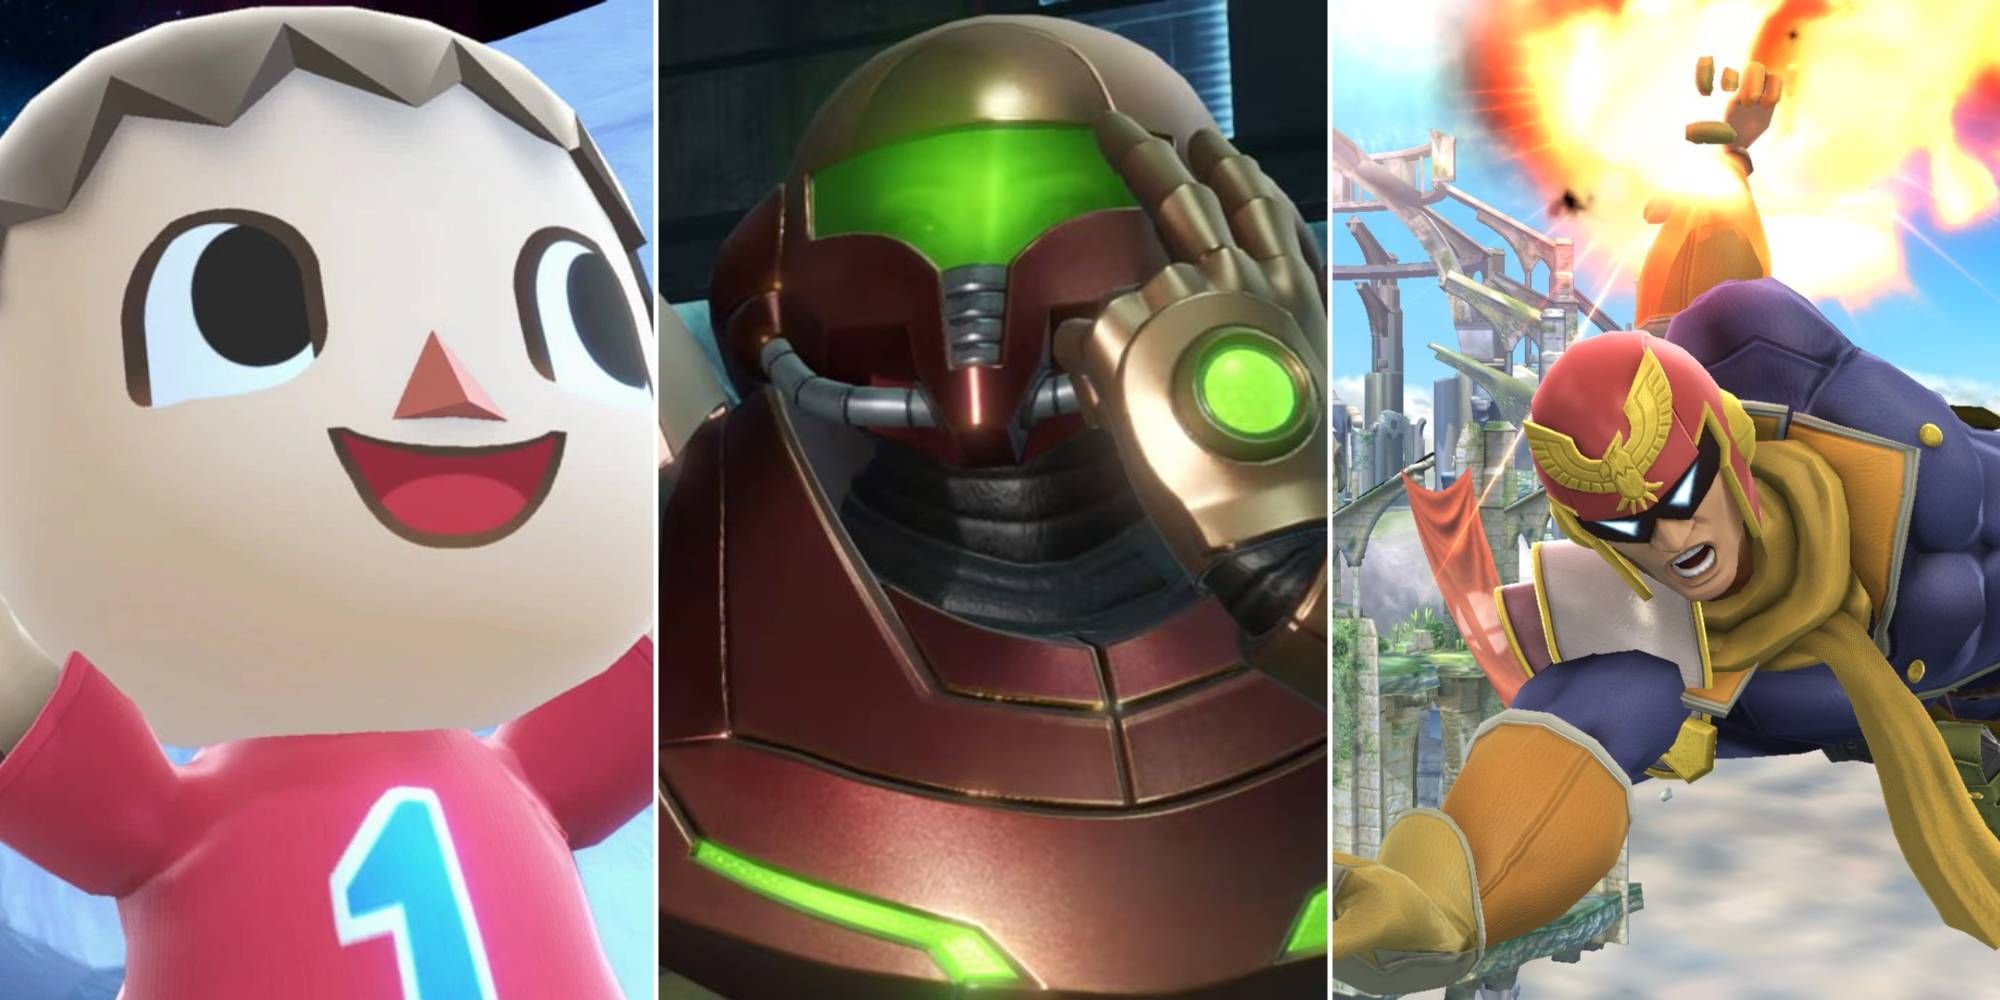 The Villager from Animal Crossing, Samus Aran from Metroid, and Captain Falcon from F-Zero.